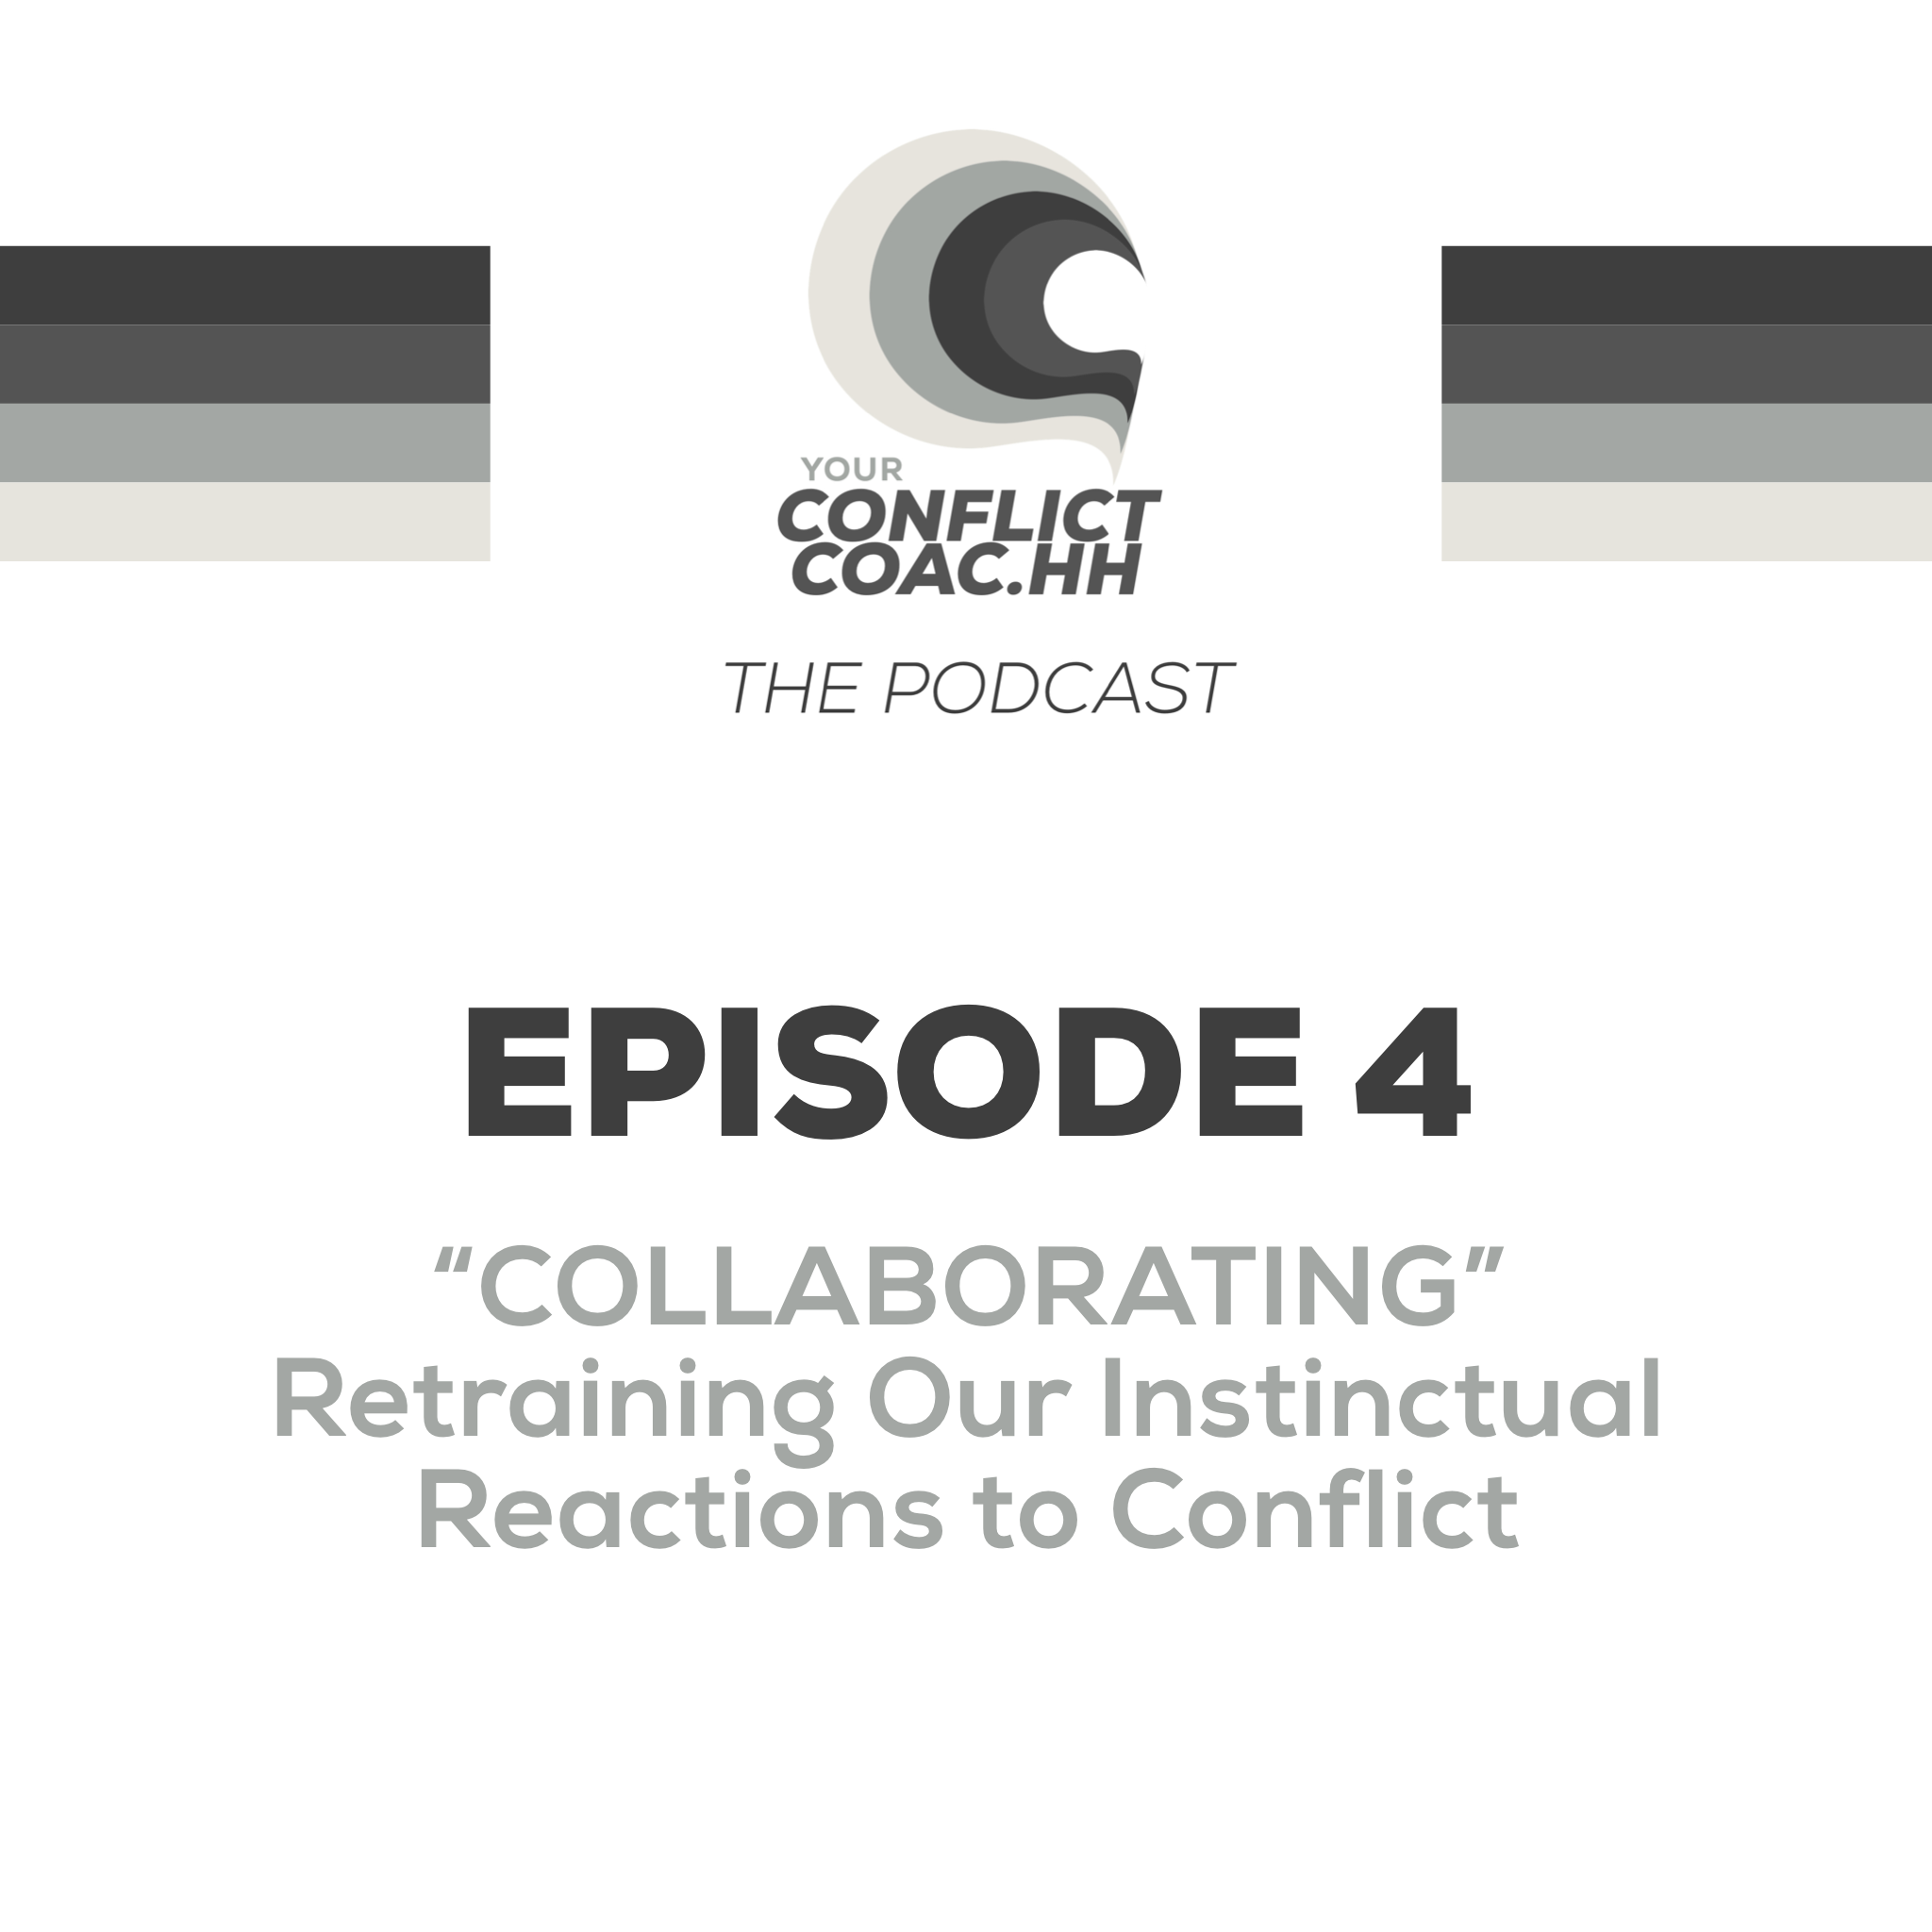 COLLABORATING - Retraining Our Instinctual Reactions to Conflict